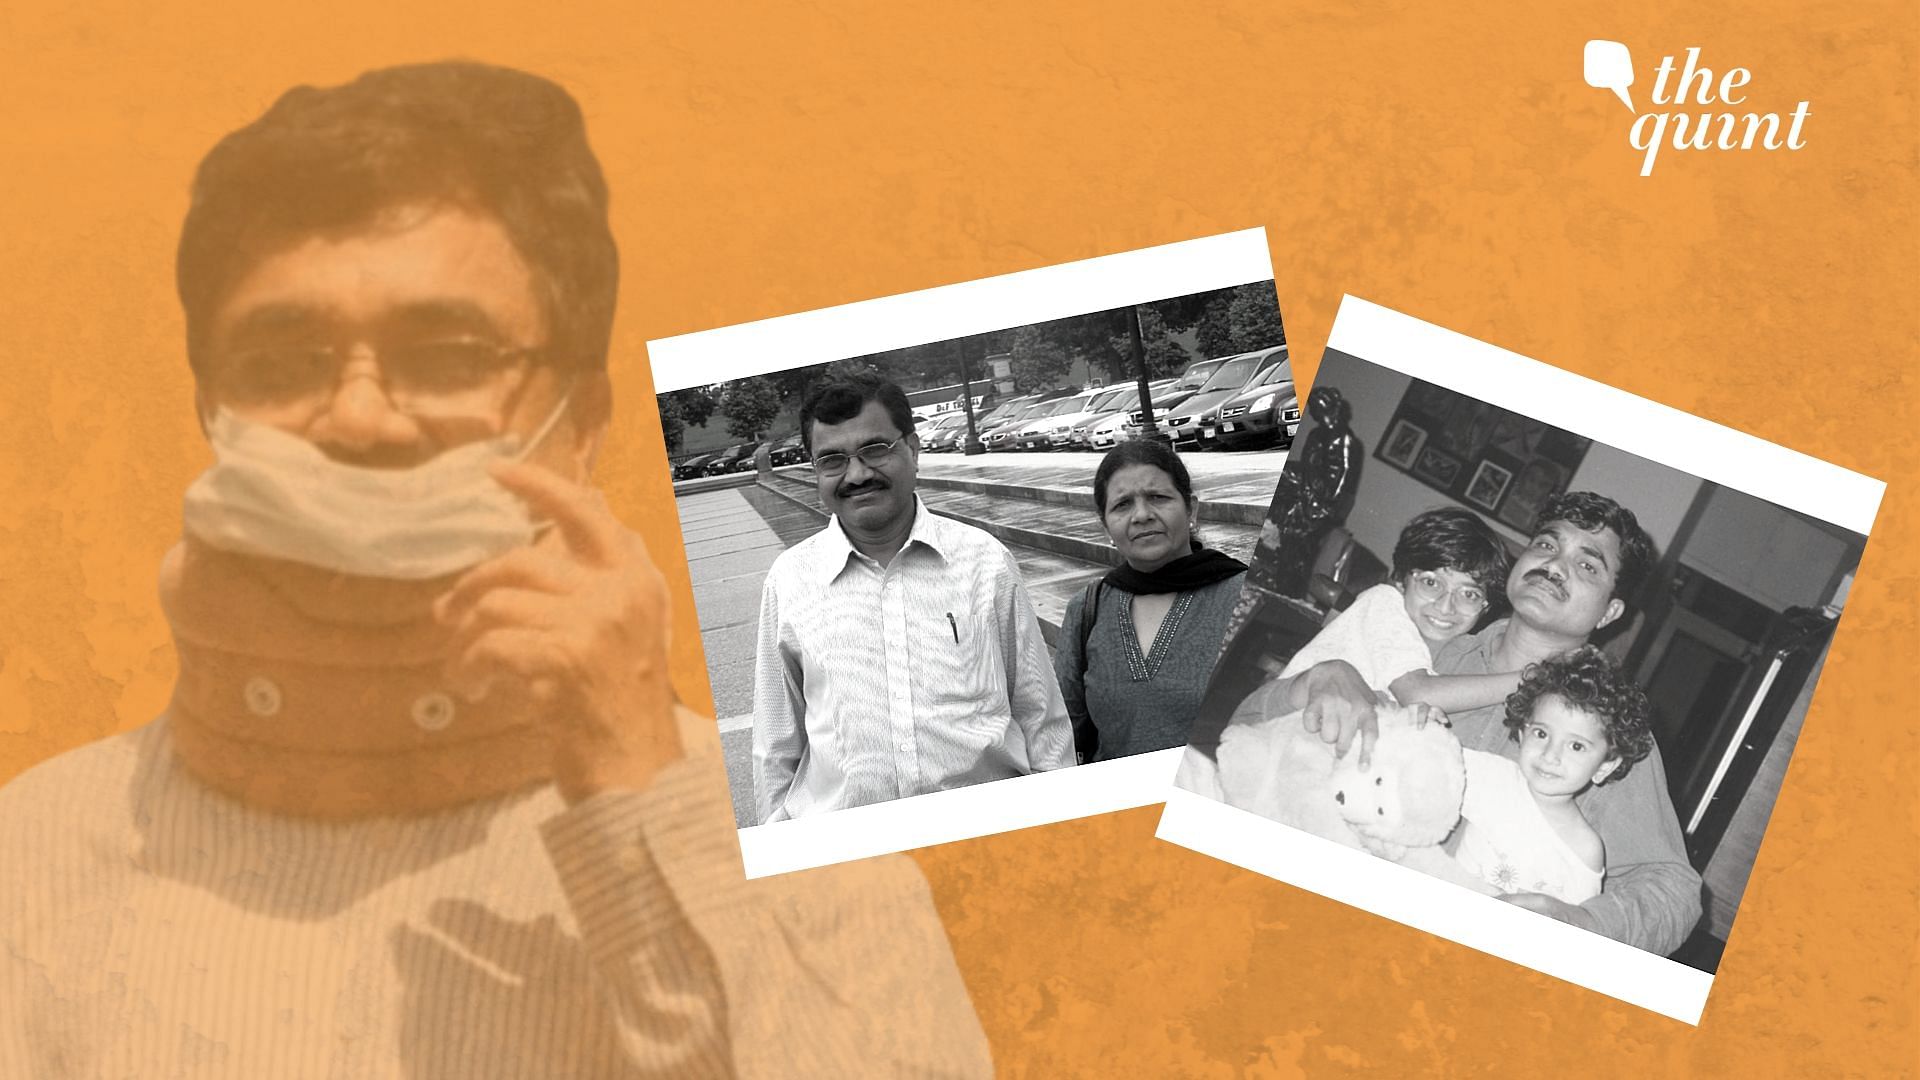 Anand Teltumbde’s wife recalls how life changed completely after police knocked on their doors in 2018 over Bhima Koregaon probe.